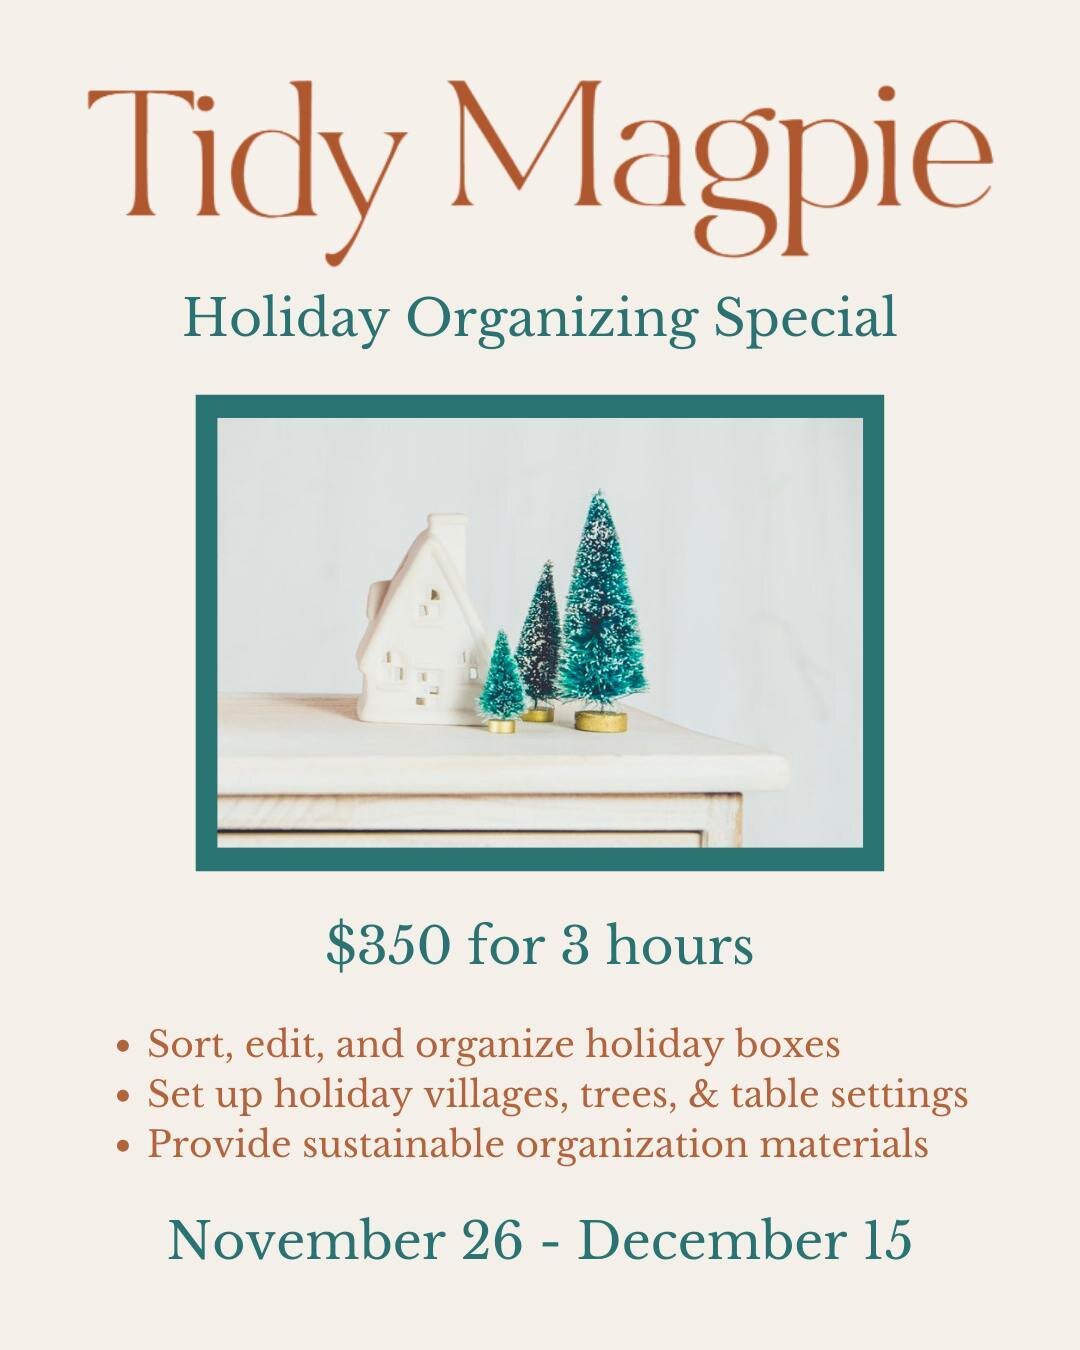 Are you overwhelmed thinking about holiday decorations? Ready to take this task off your plate? The Tidy Magpie is here to help! 💪

Let US get your holiday supplies organized now. Whether it&rsquo;s ornaments, wreaths, or your vast collection of nut